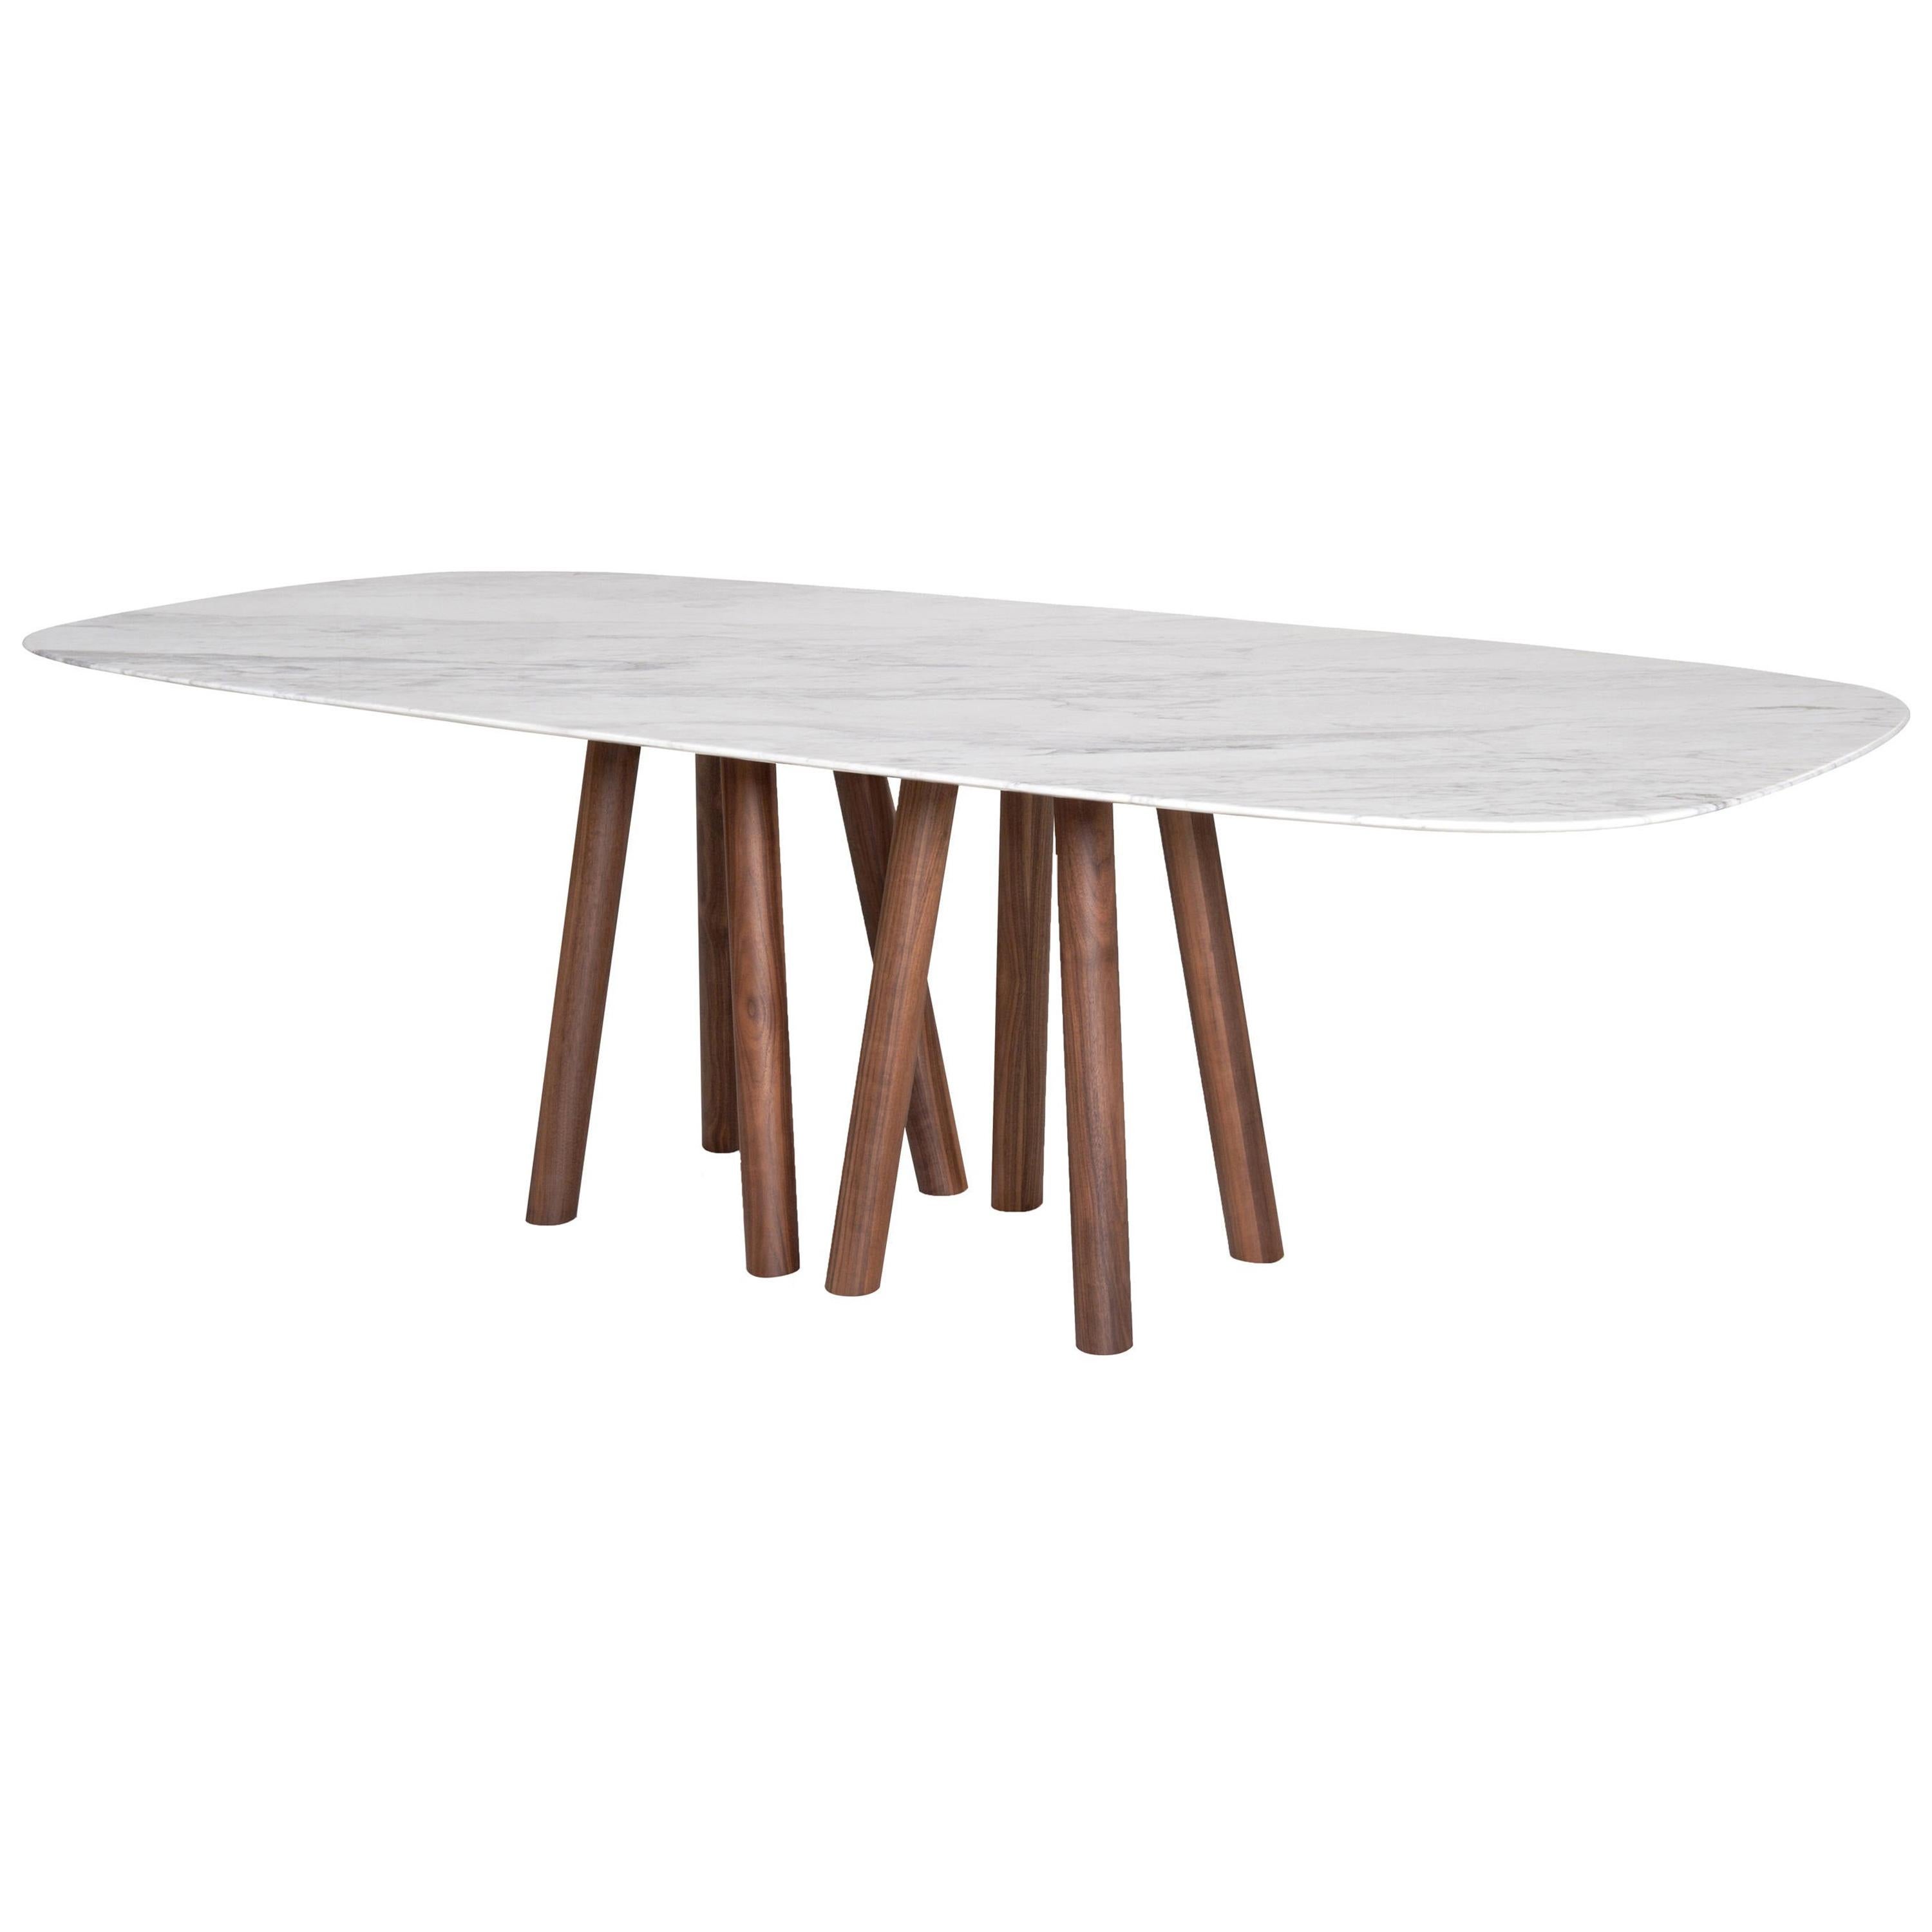 Caterpillar Dining Table, White Marble/American Walnut